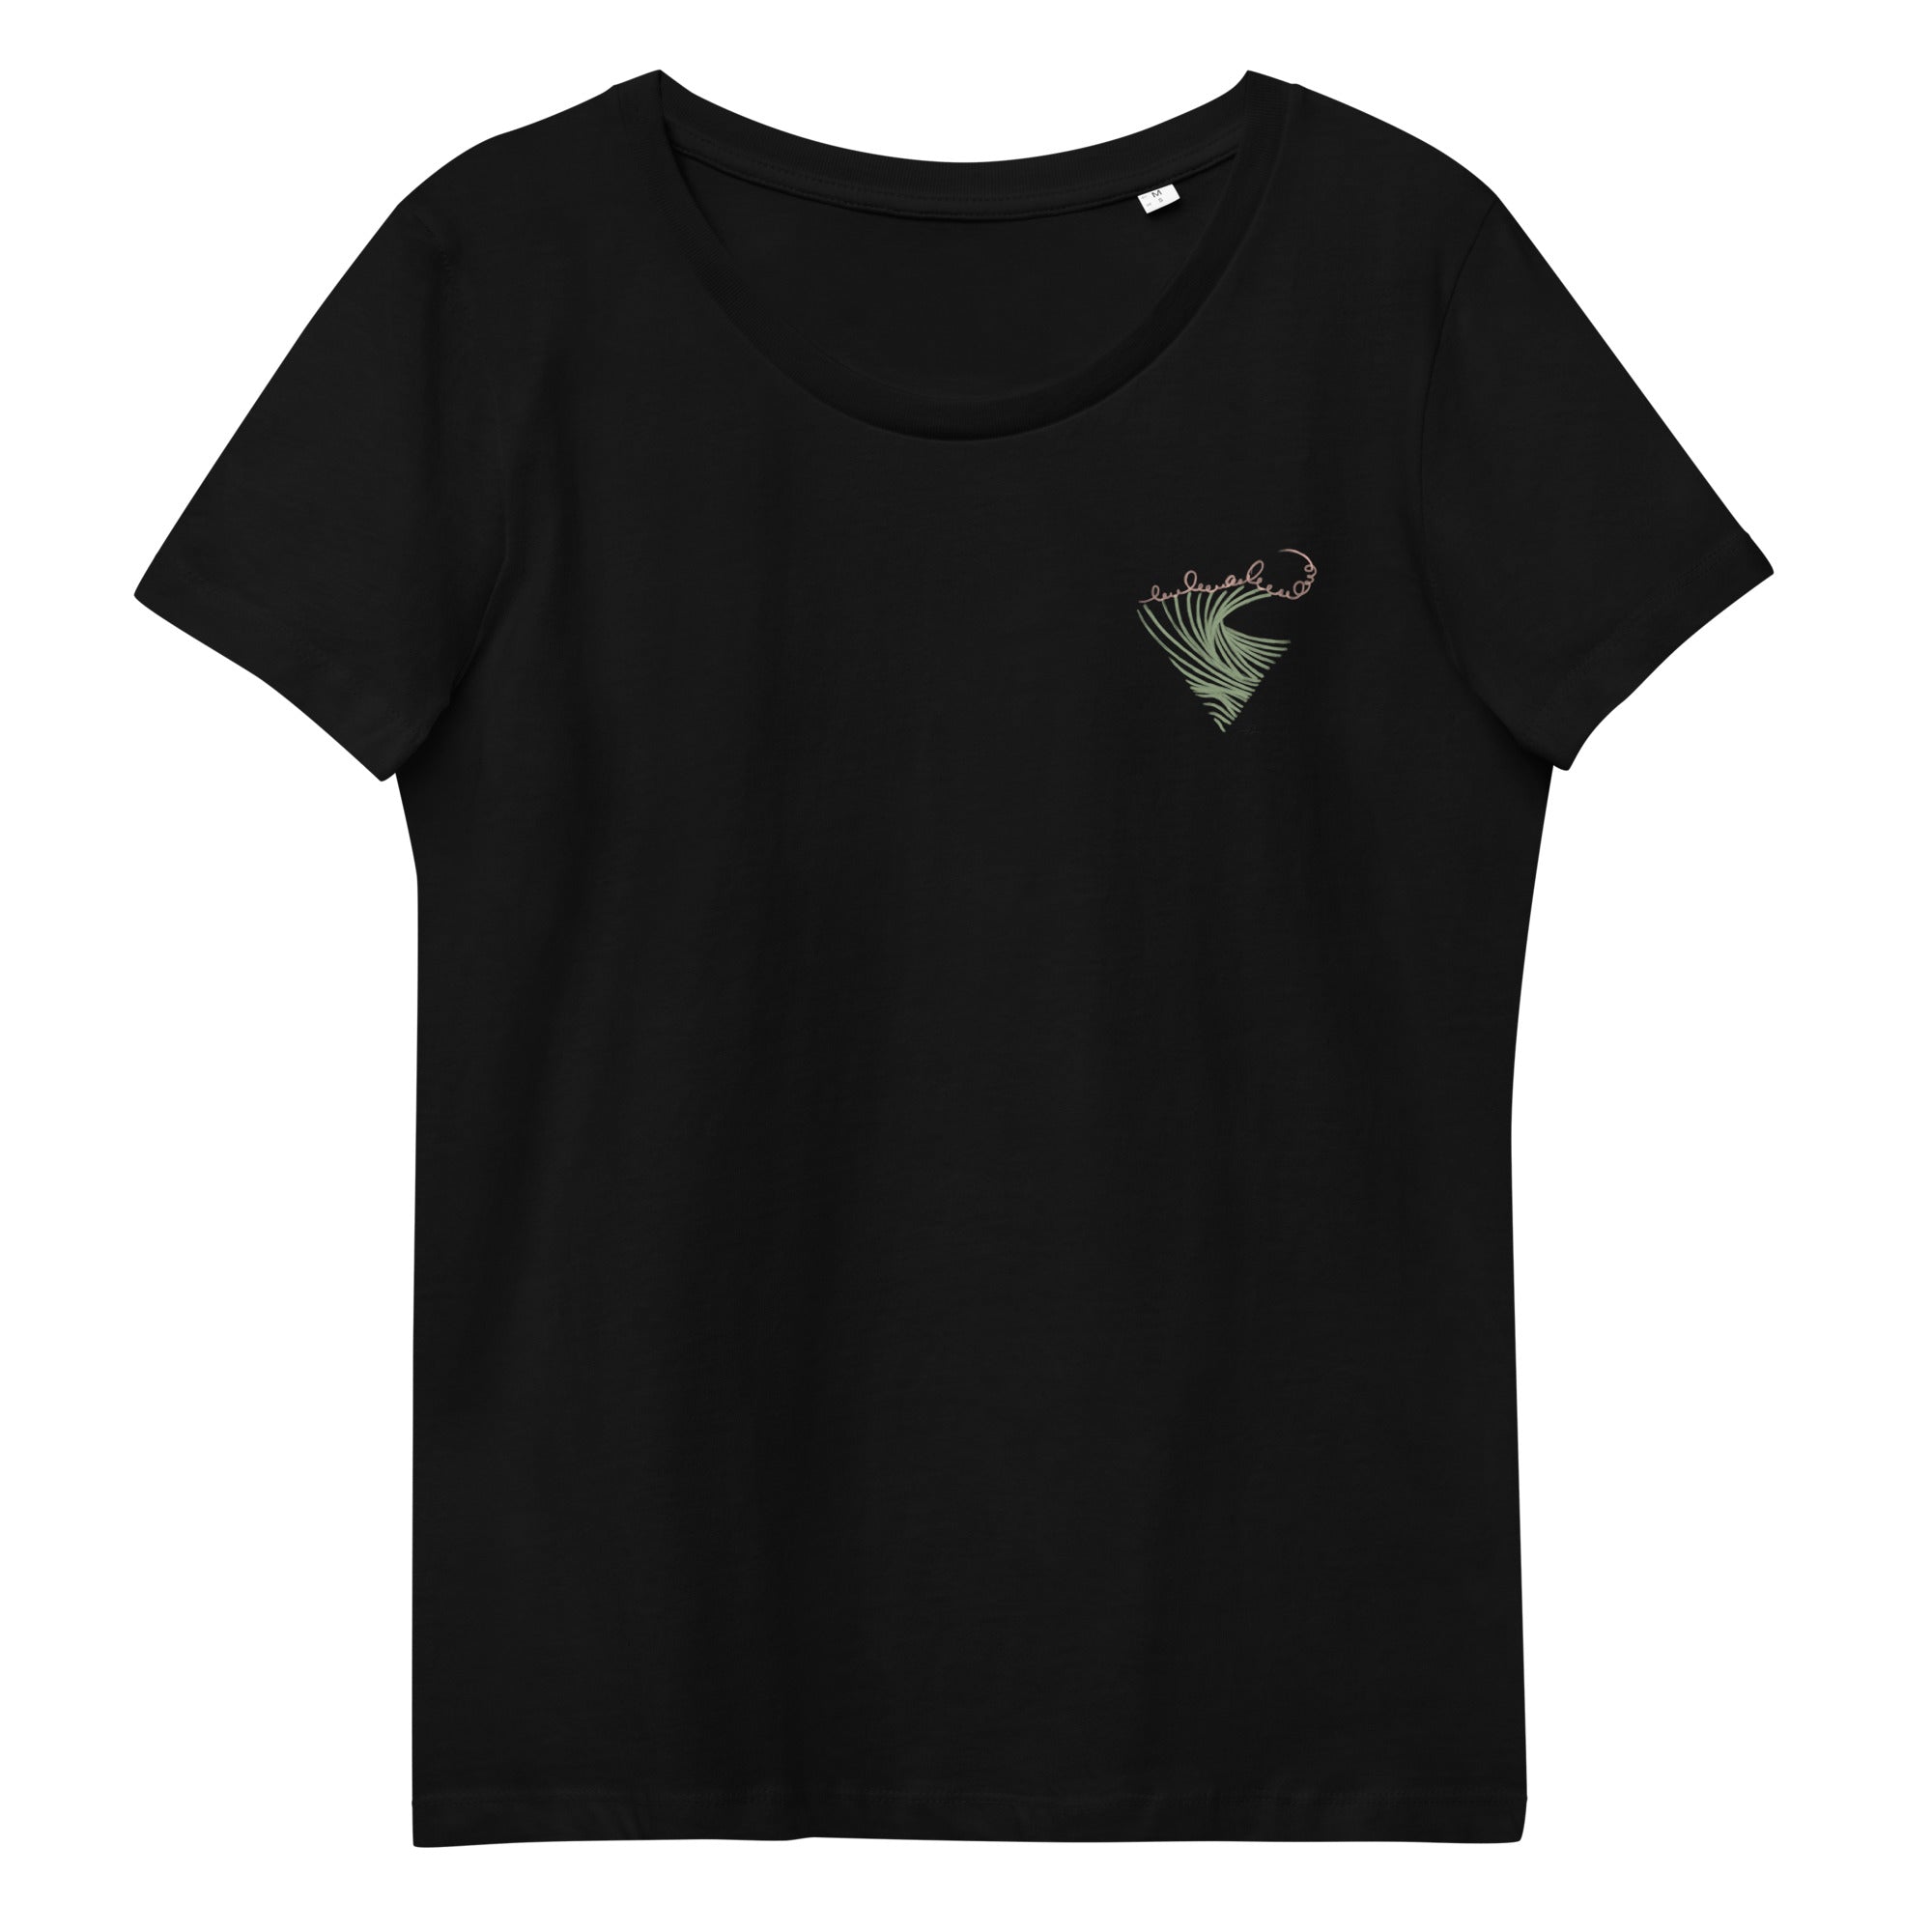 "Liquid Triangle" Women's fitted eco tee